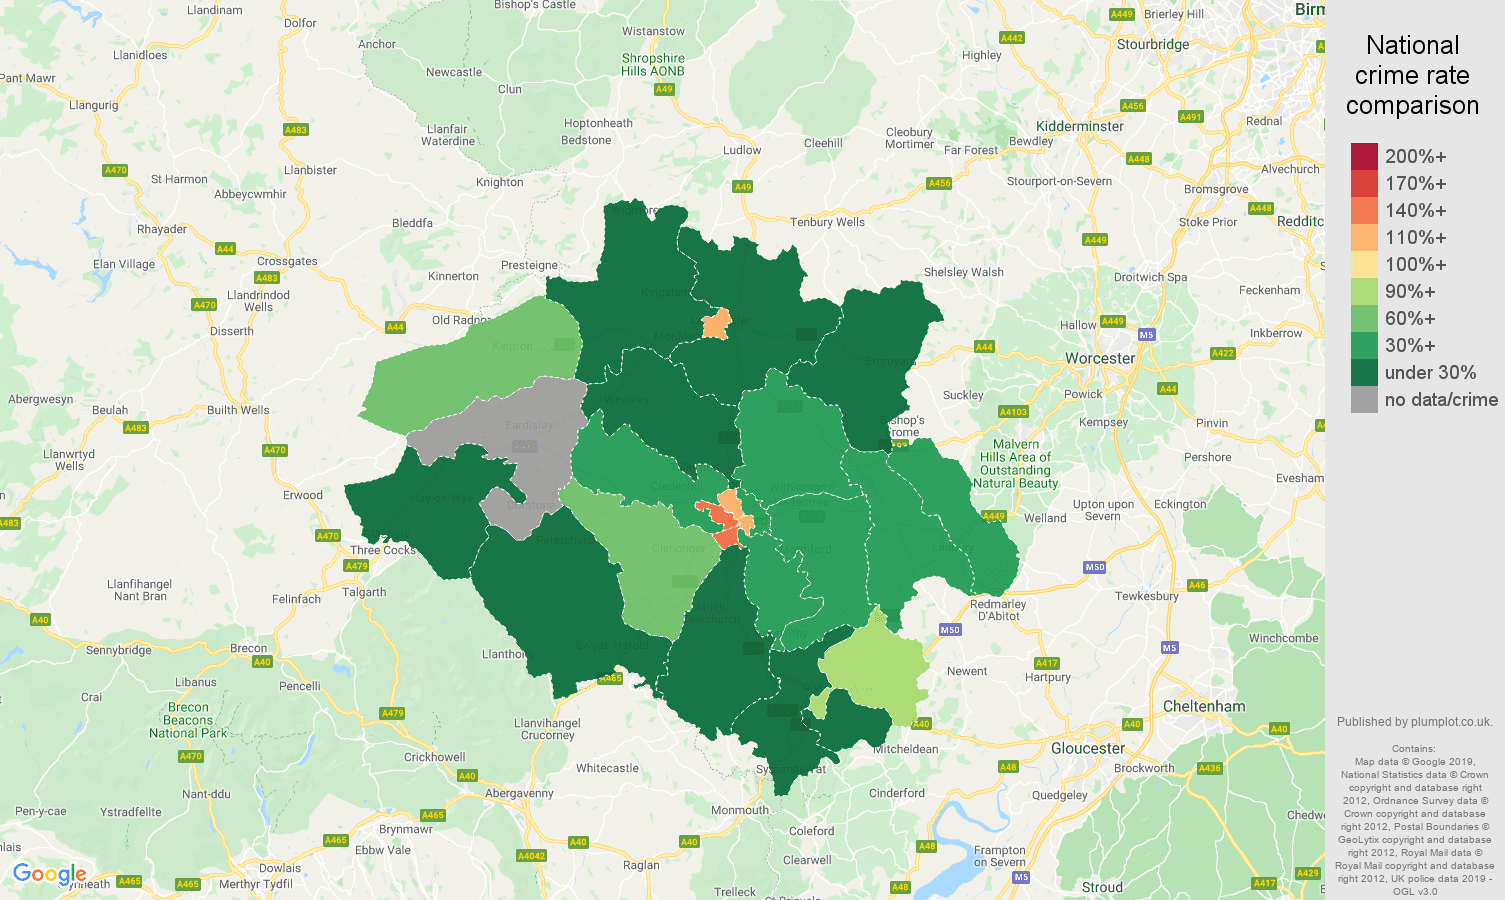 Hereford other crime rate comparison map